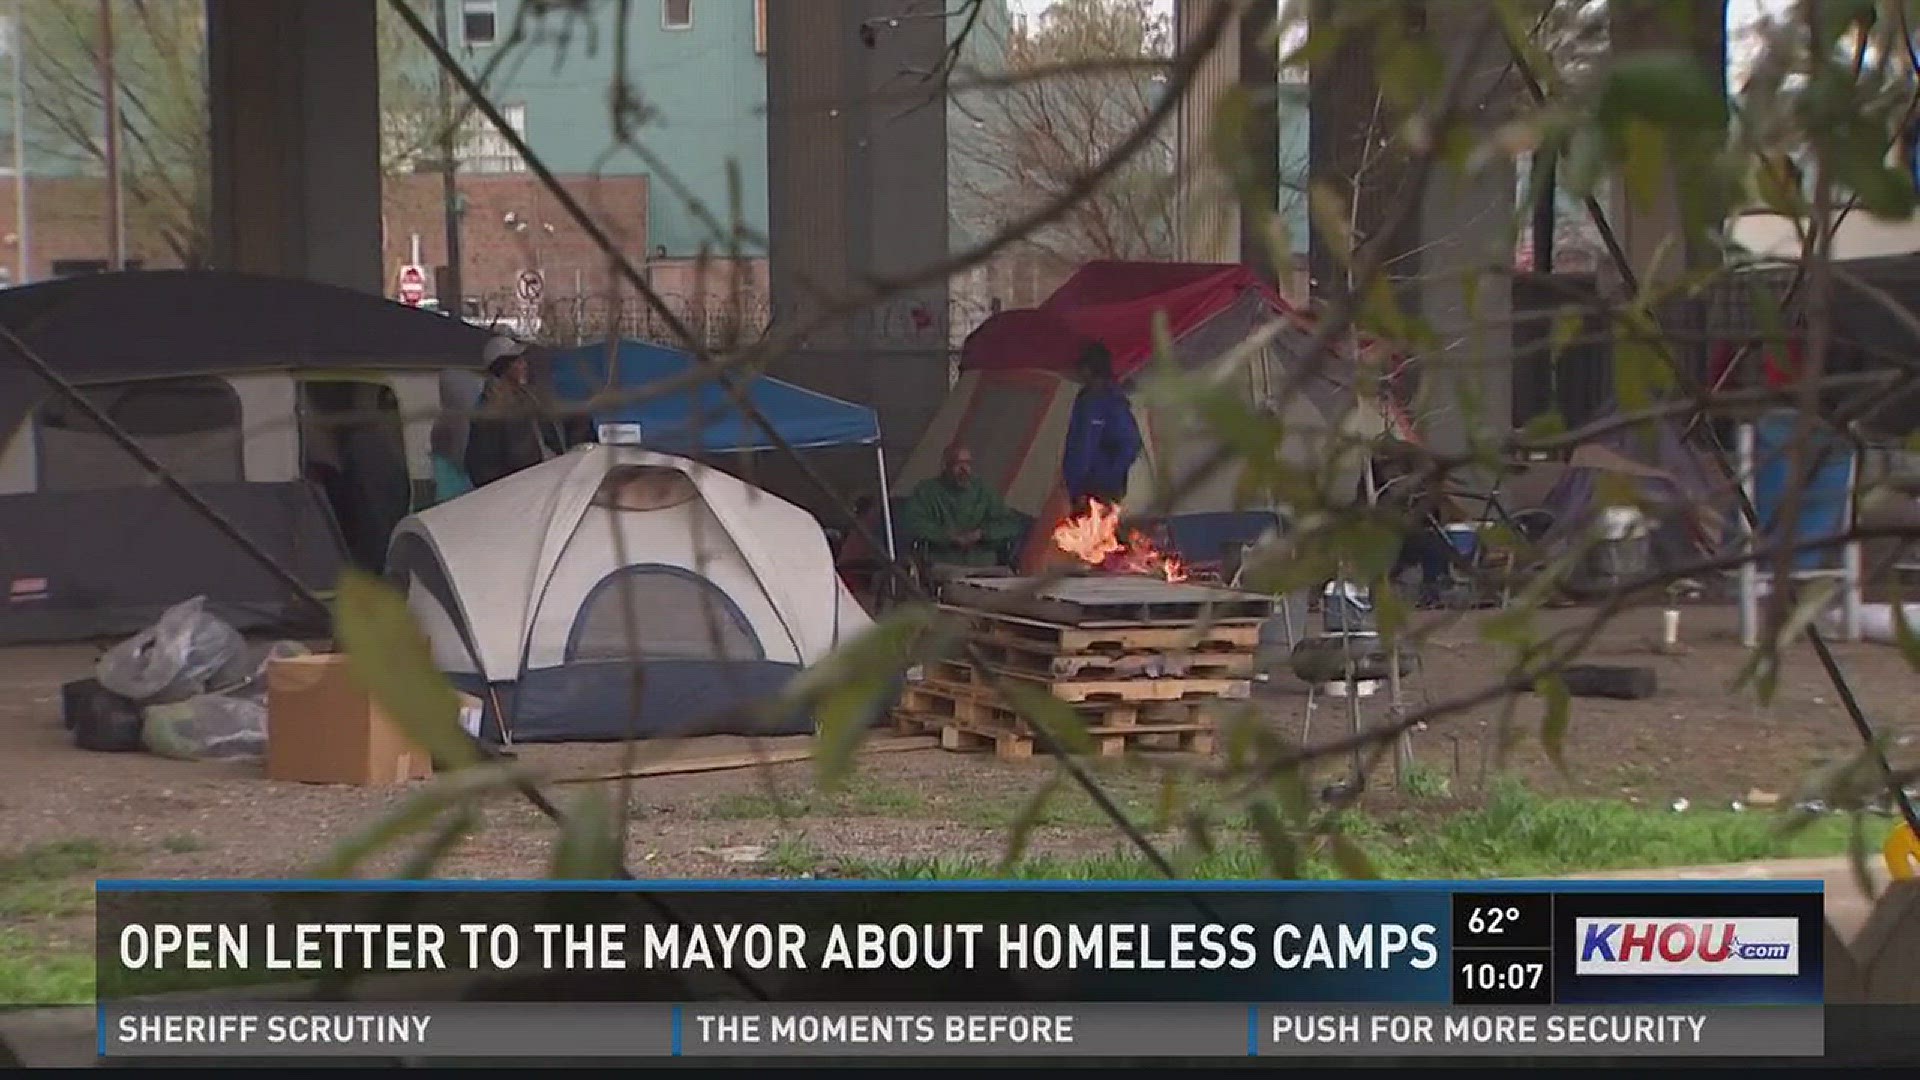 A Houston man, who is fed up with growing homeless encampments, has penned an open letter to Mayor Sylvester Turner.